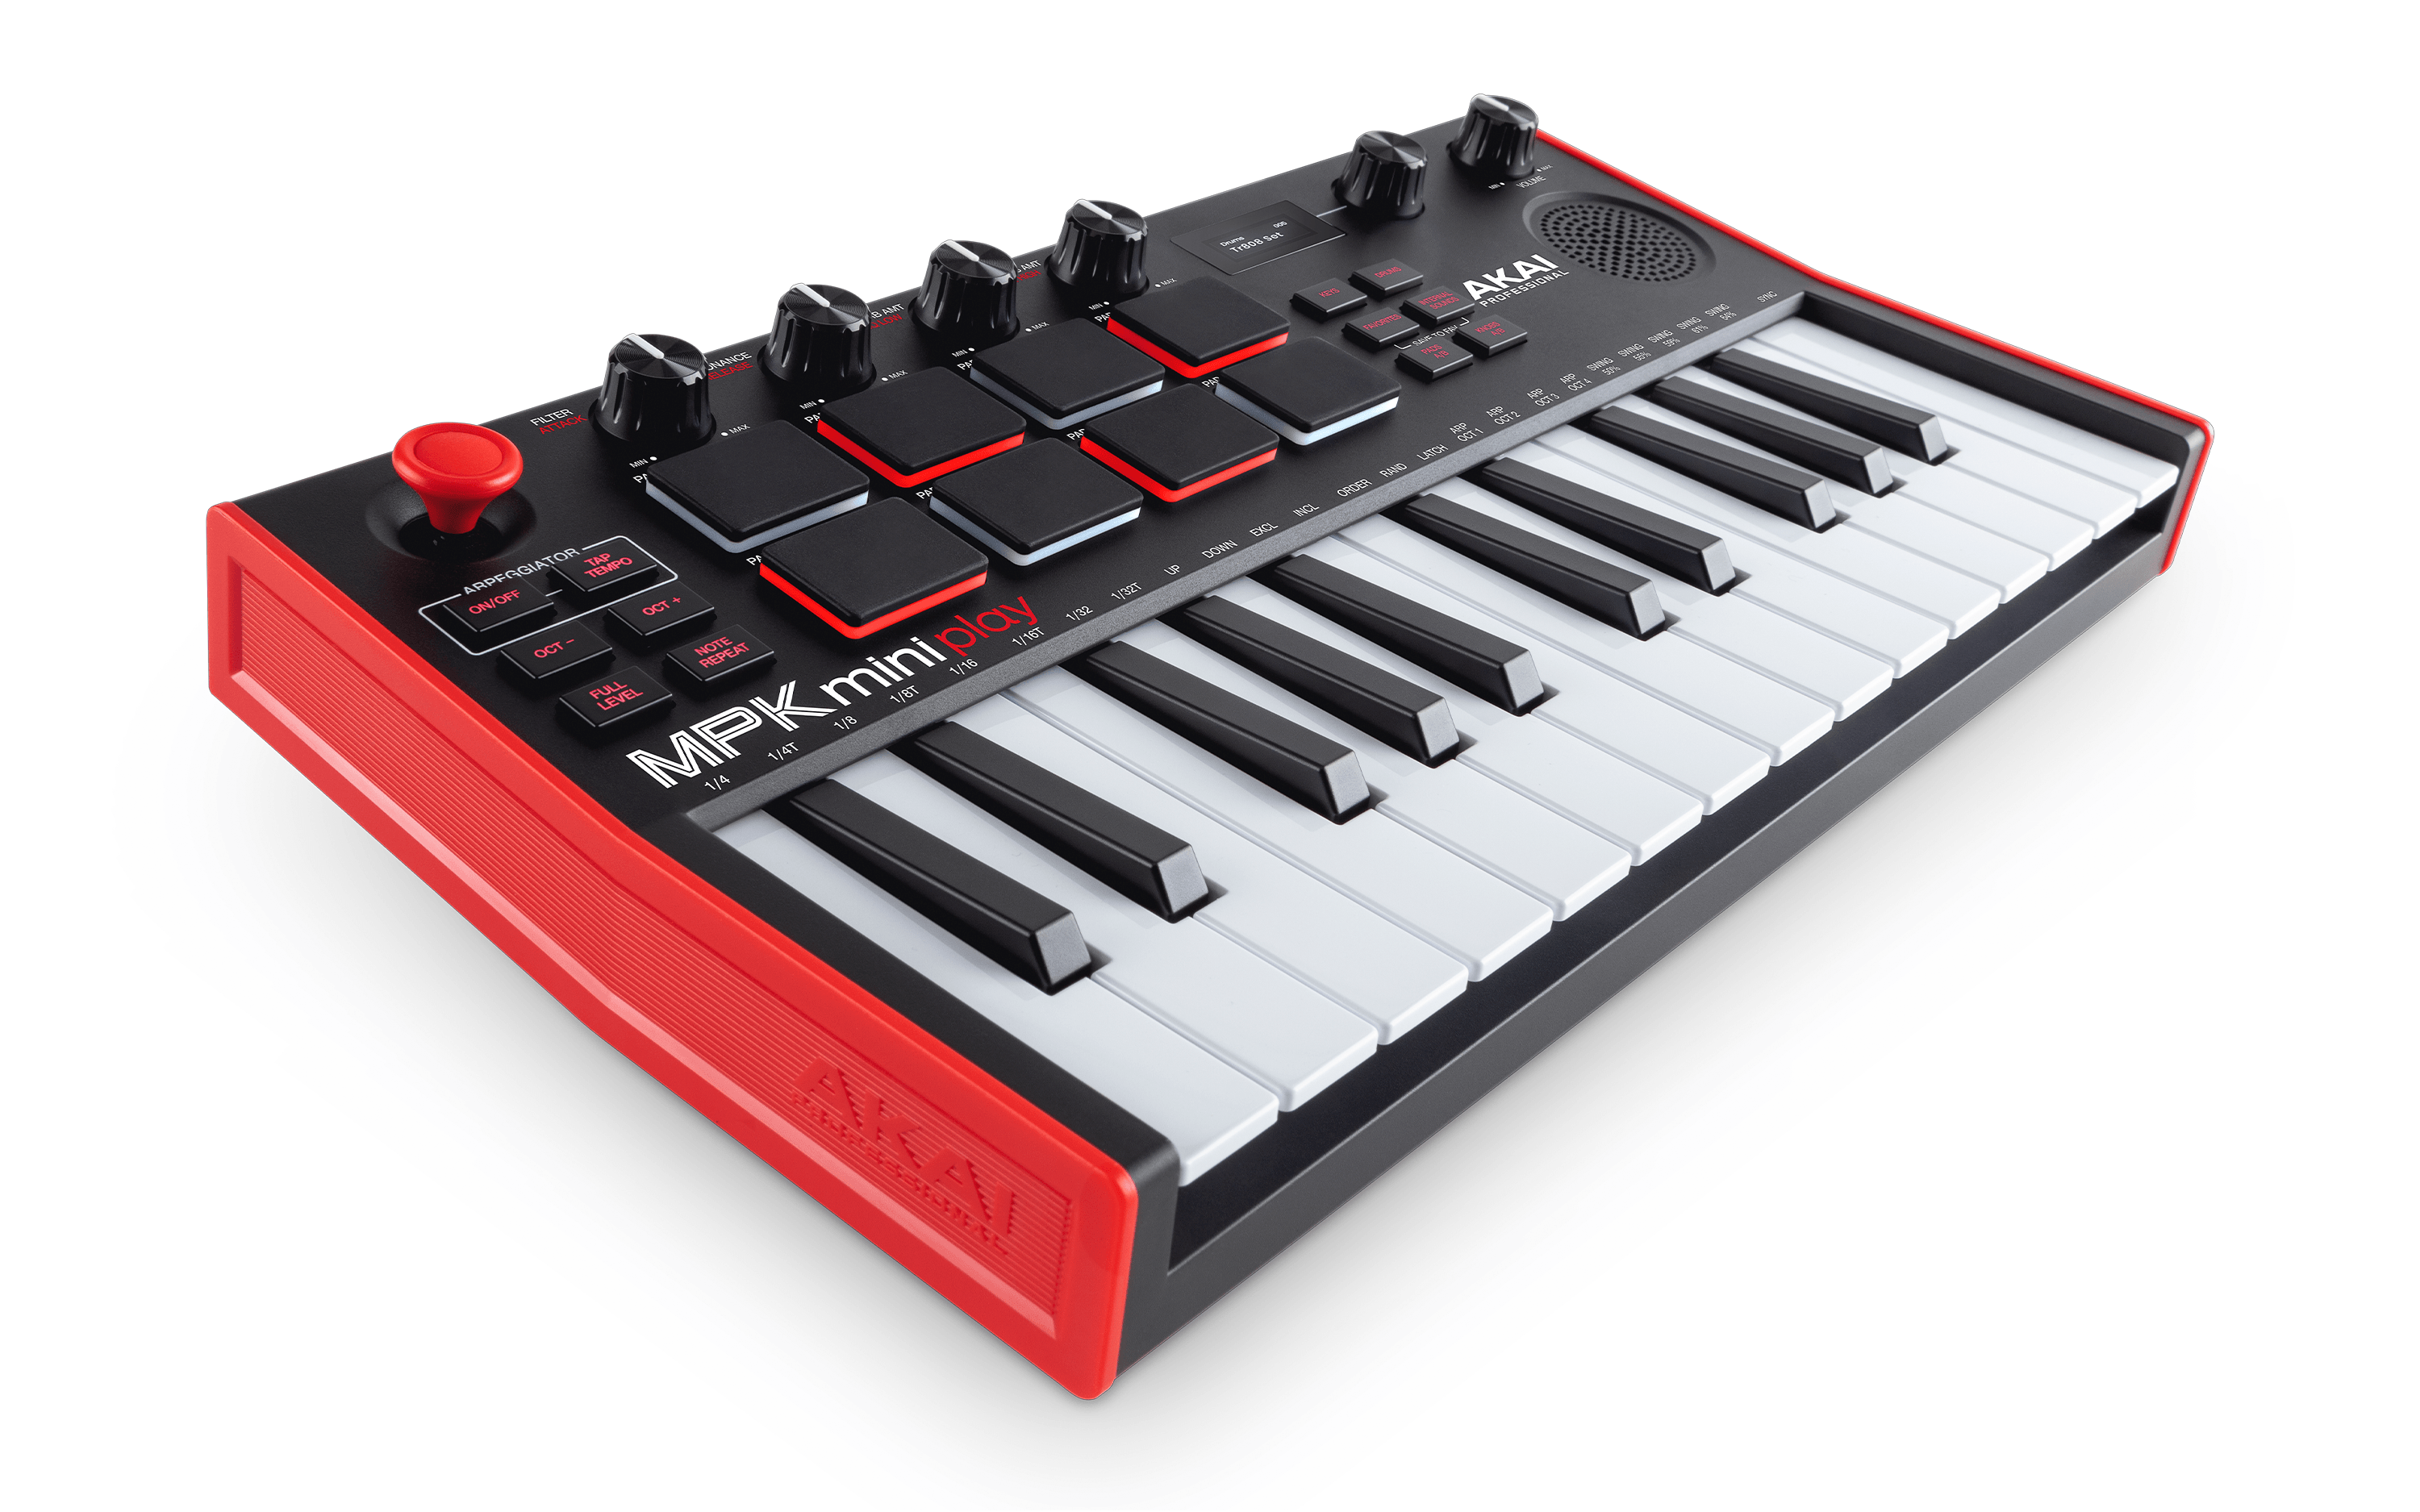 Top down view of MPK Mini MIDI Controller in Special Edition Red